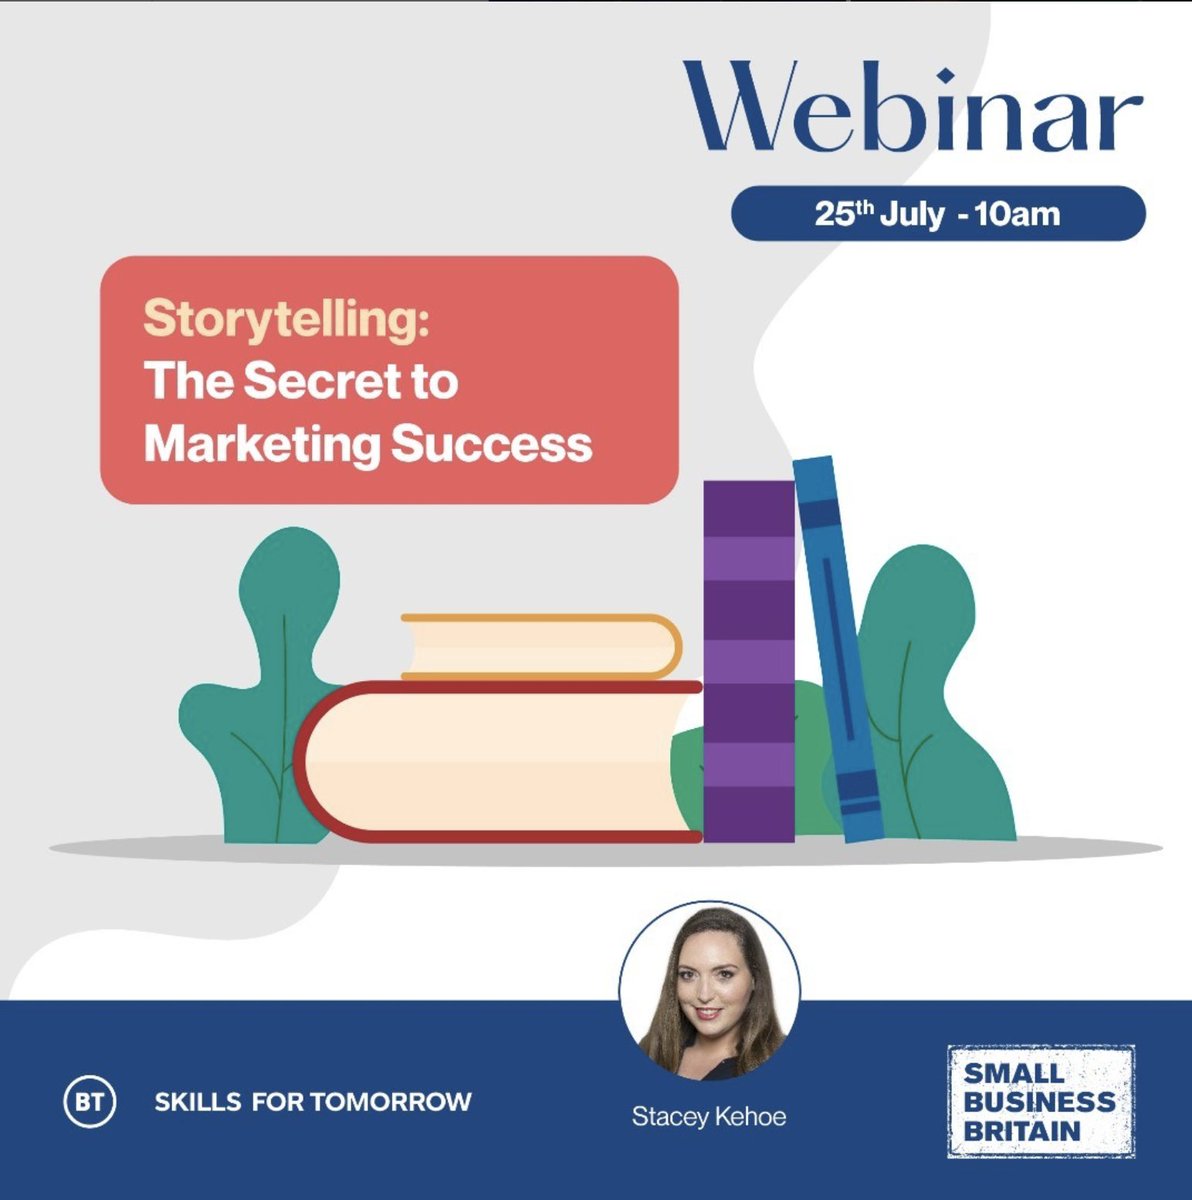 Really excited to see #ialso100 Stacey Kehoe, founder of @Brandlective who is hosting a webinar for @britainsmallbiz and #BTSkillsForTomorrow on 25th July:  The Secret To Marketing Success.
Click the link here to REGISTER for Tuesday 25th July:
smallbusinessbritain.uk/events